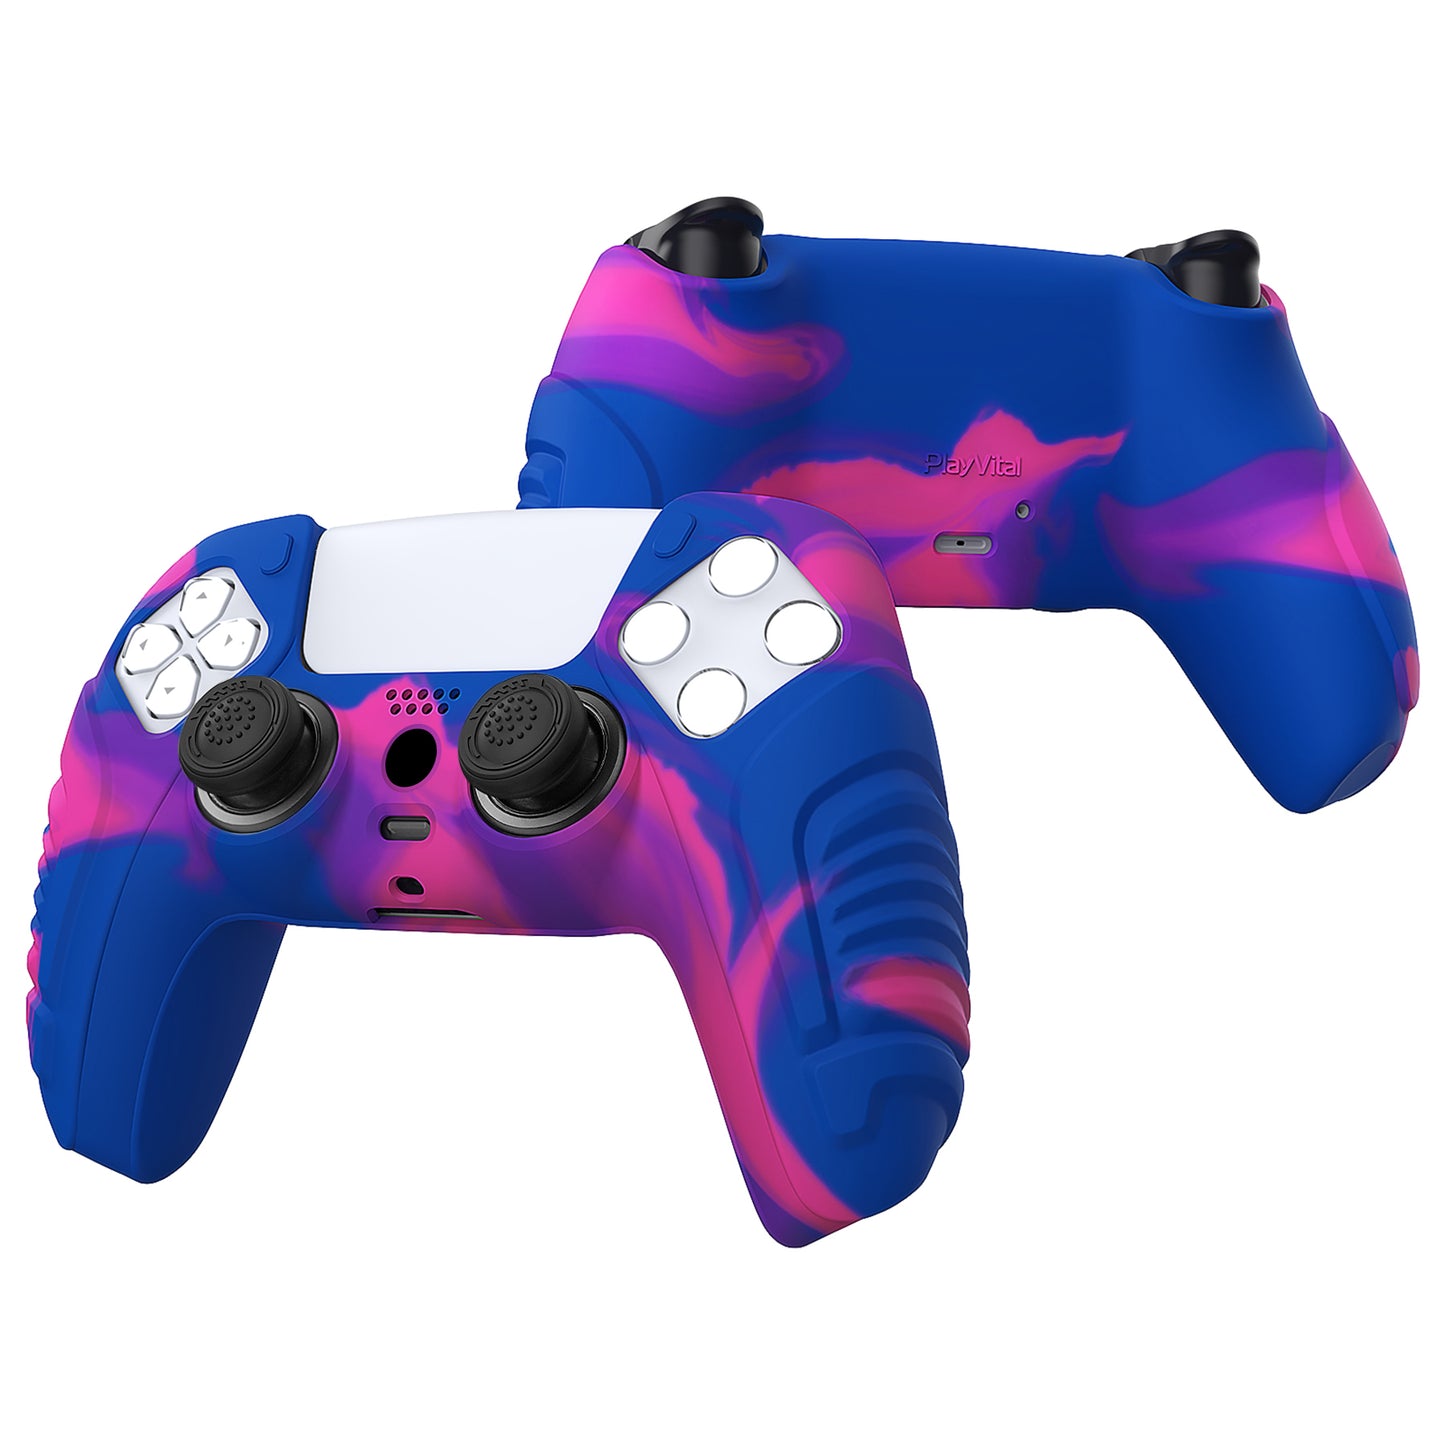 PlayVital Raging Warrior Edition Anti-slip Silicone Cover Skin with Thumbstick Caps for PS5 Wireless Controller - Pink & Purple & Blue - KZPF007 PlayVital